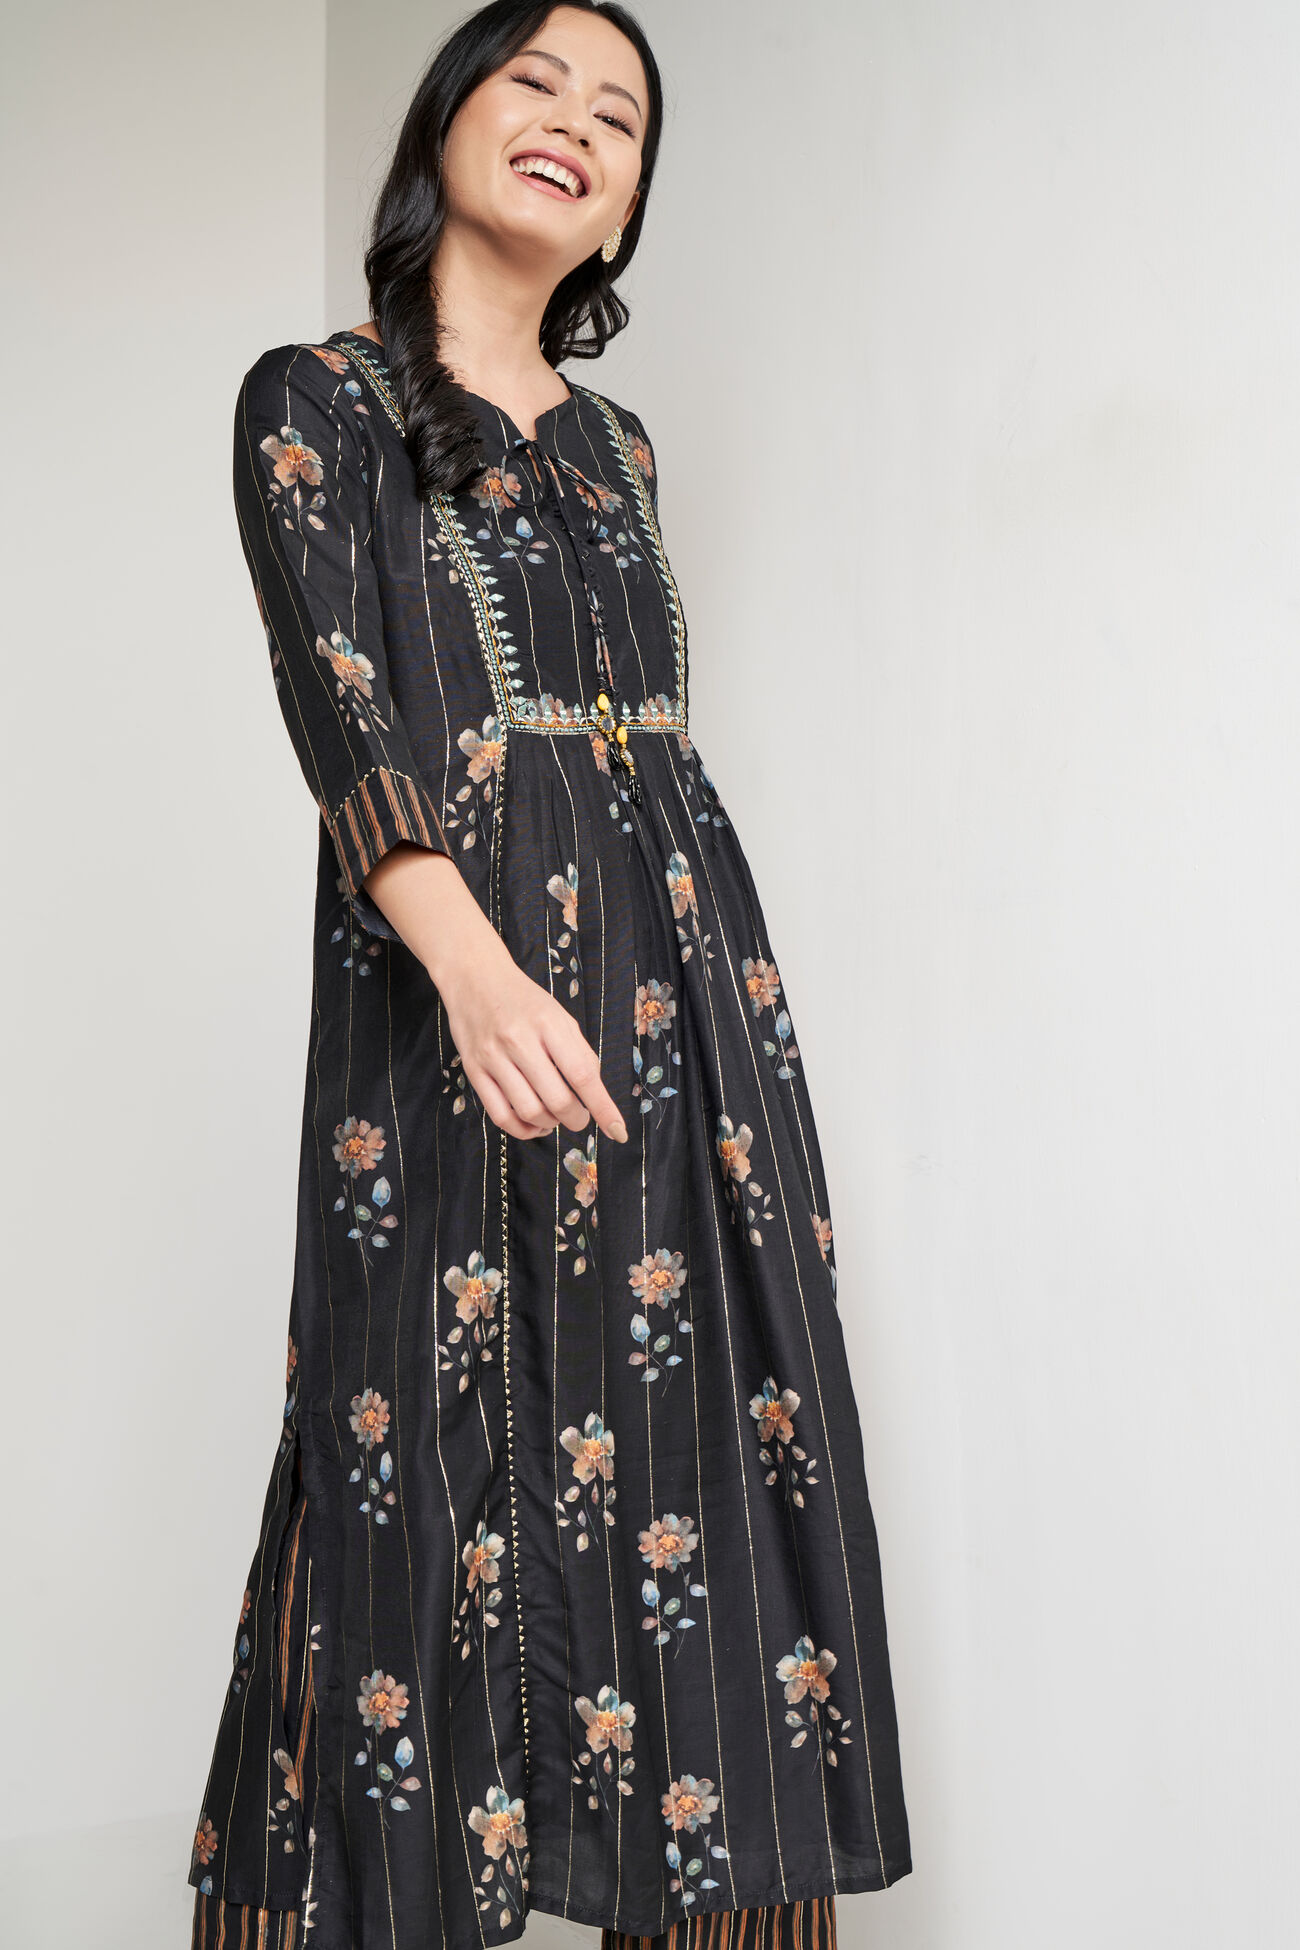 Buy Black Ethnic Motifs Straight Suit Online at Best Price at Global ...